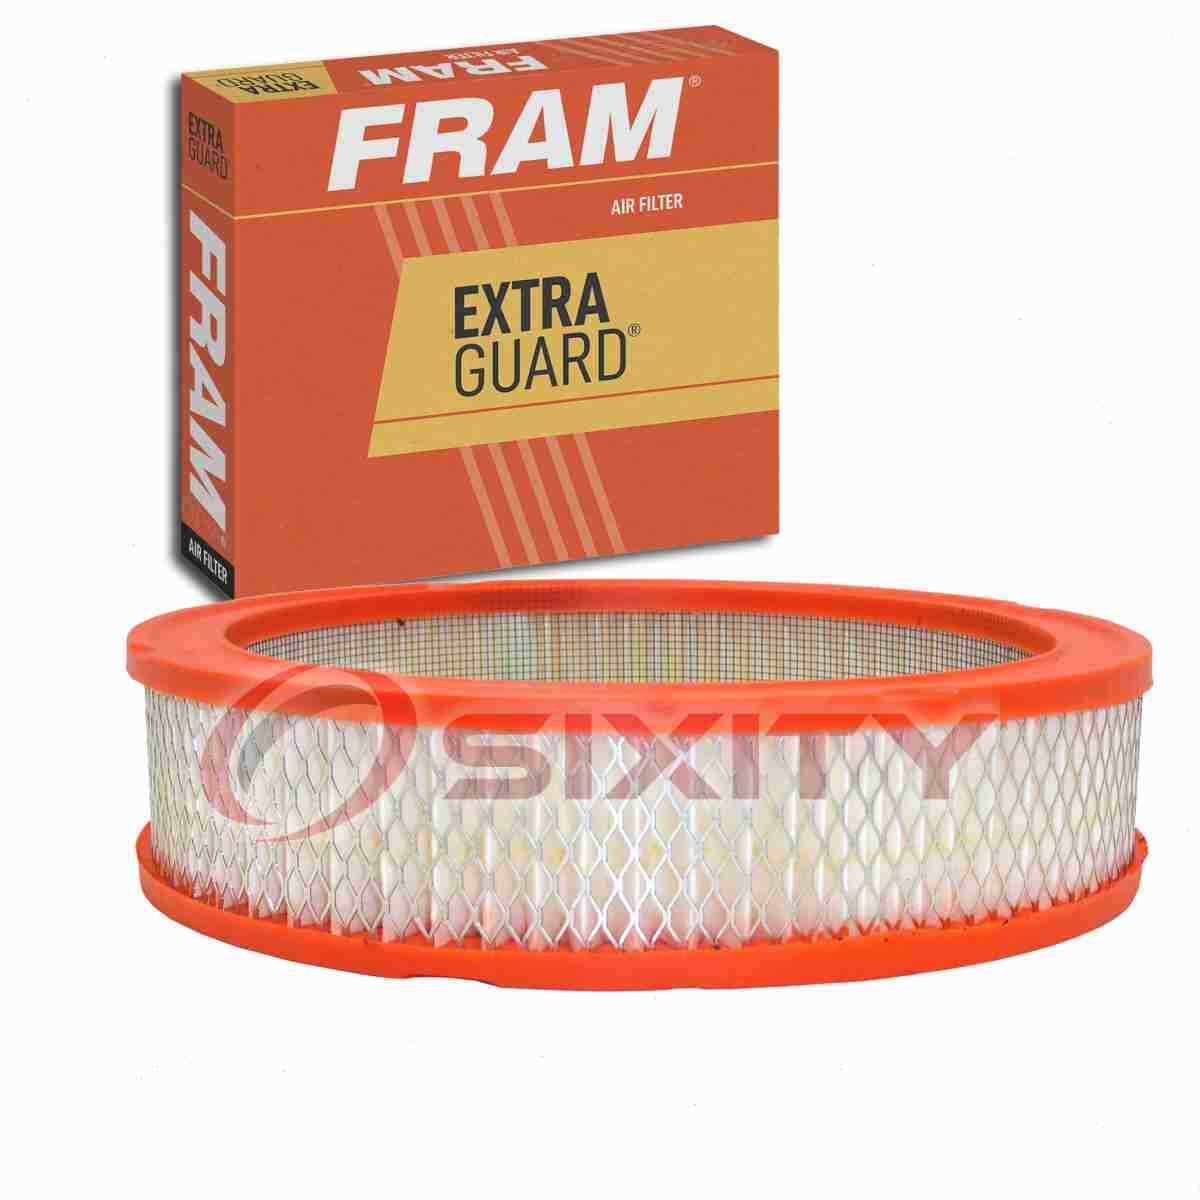 FRAM Extra Guard Air Filter for 1963-1966 Ford Galaxie Intake Inlet Manifold lj